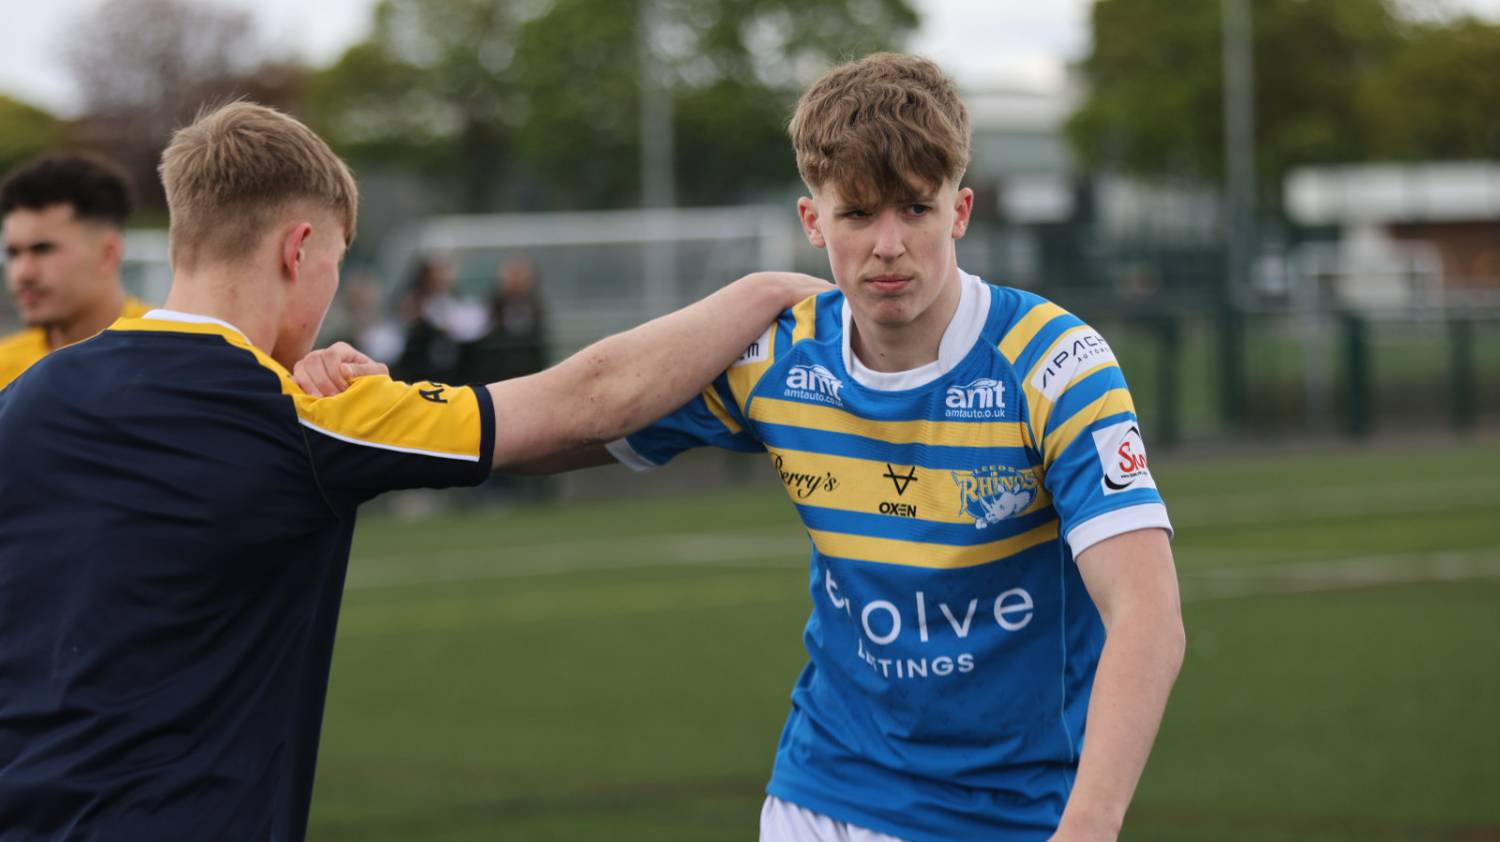 Hutchinson pleased Rhinos got win in first Academy outing